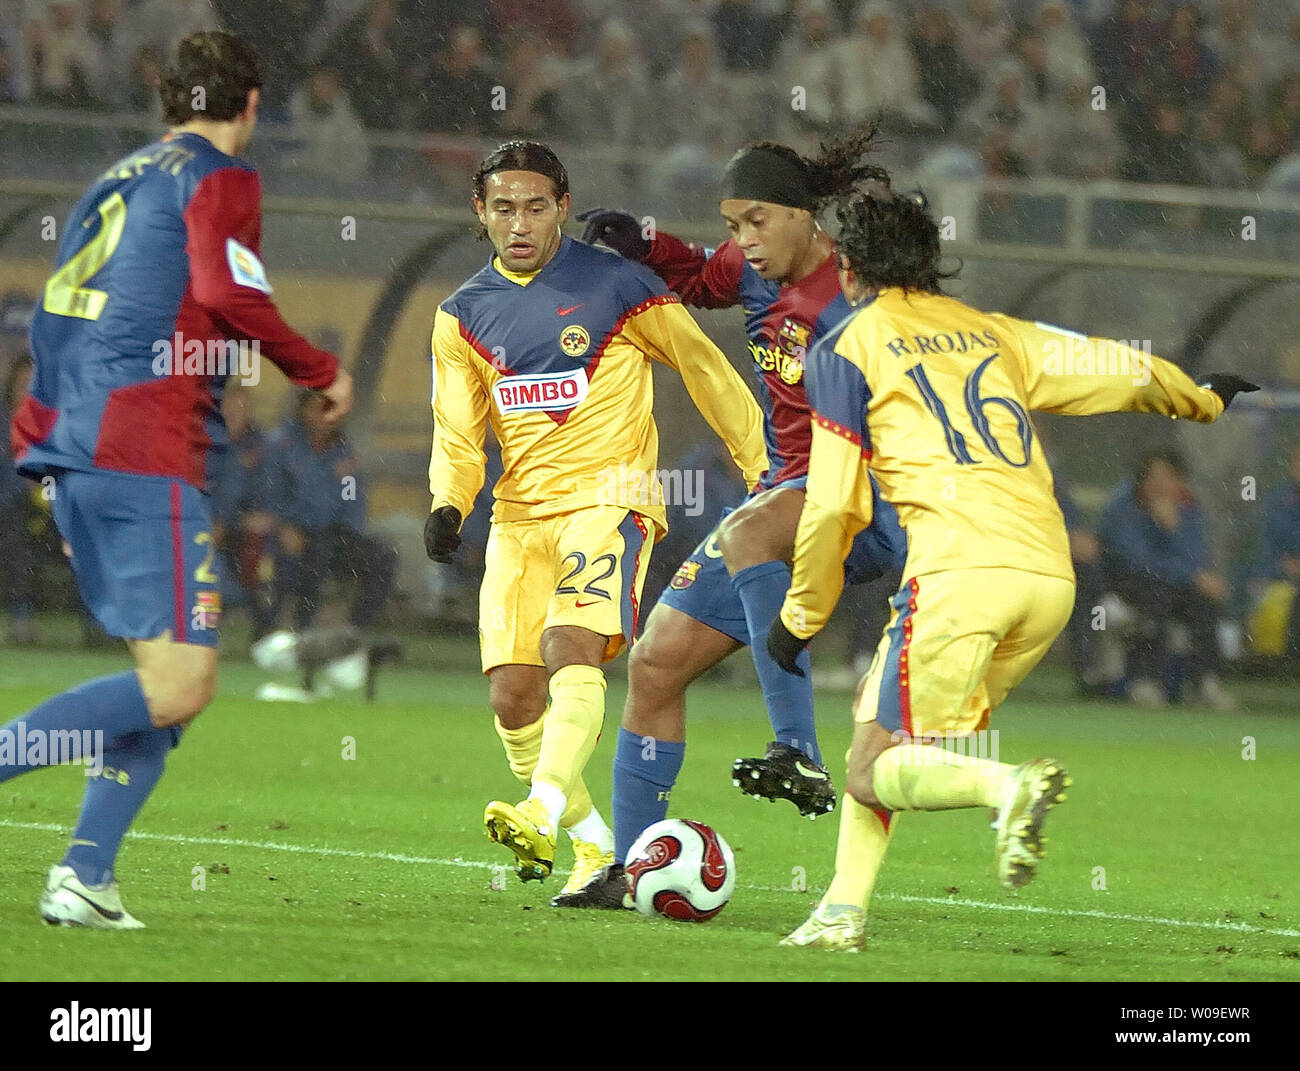 FC Barcelona's Ronaldinho dribbles the ball away from the defense in the second half of  the FIFA Club World Cup semifinal against Mexico's Club America at Yokohama's Nissan Stadium in Japan on December 14, 2006. FC Barcelona beat Club America 4-0. (UPI Photo/Keizo Mori) Stock Photo